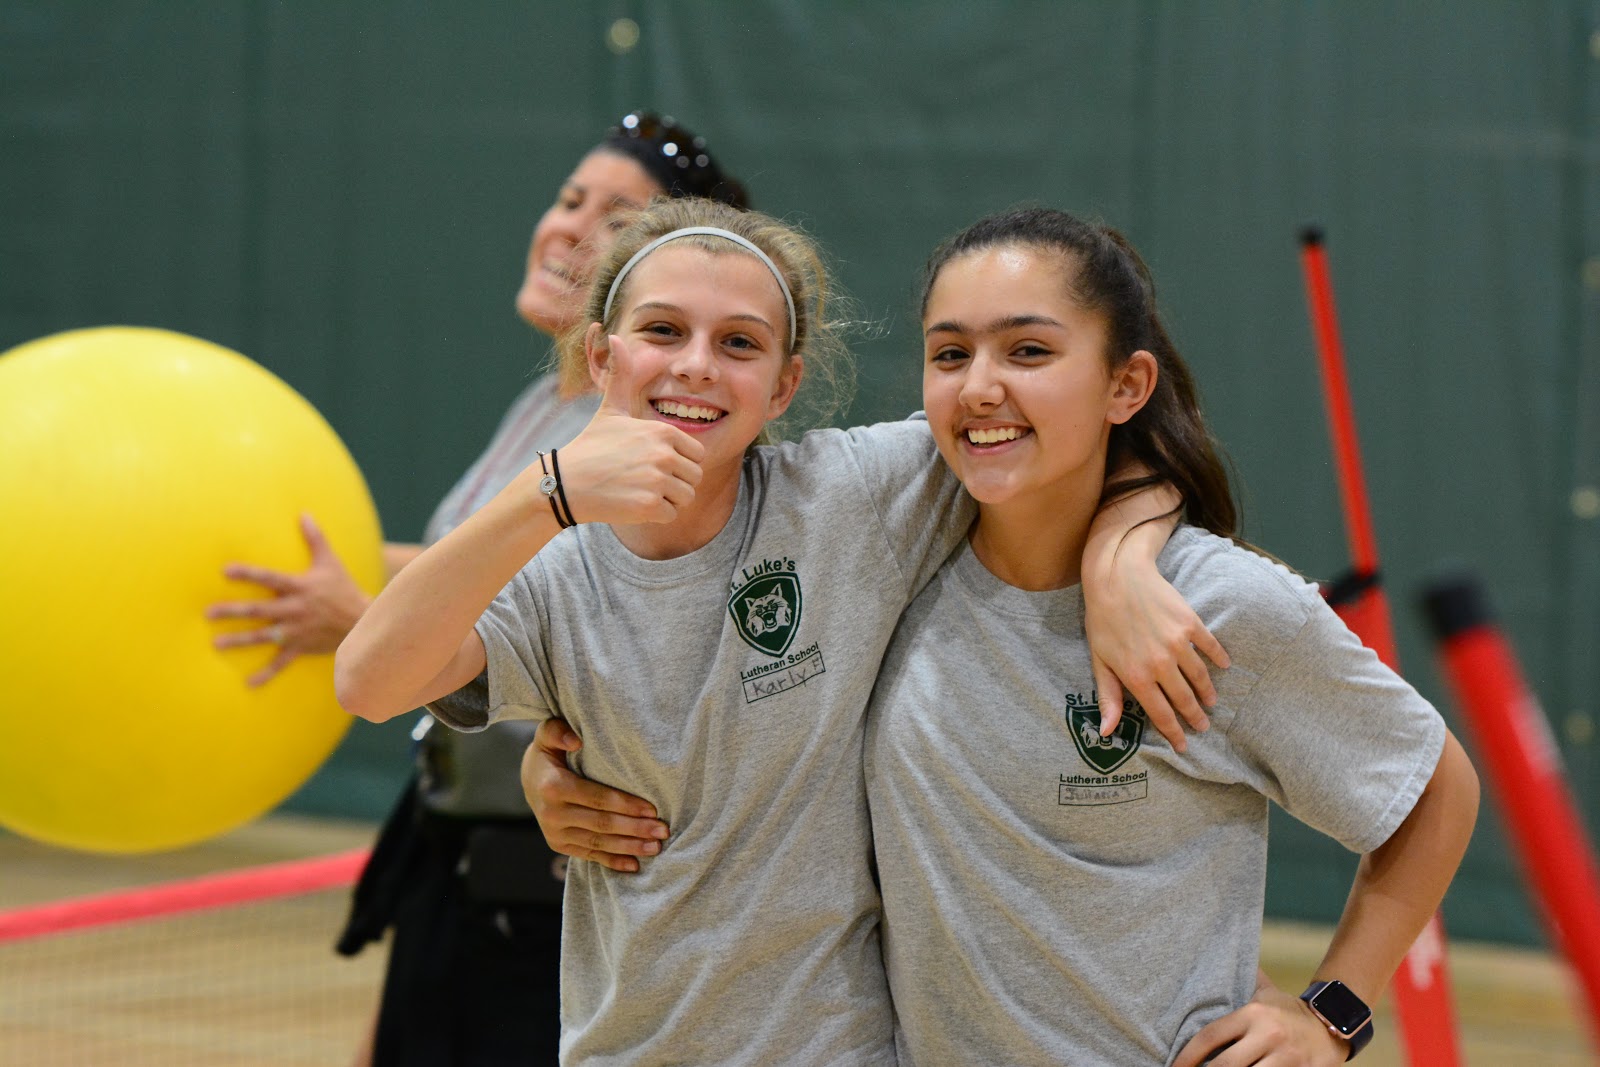 Two Middle Schoolers Smiling During P.E.